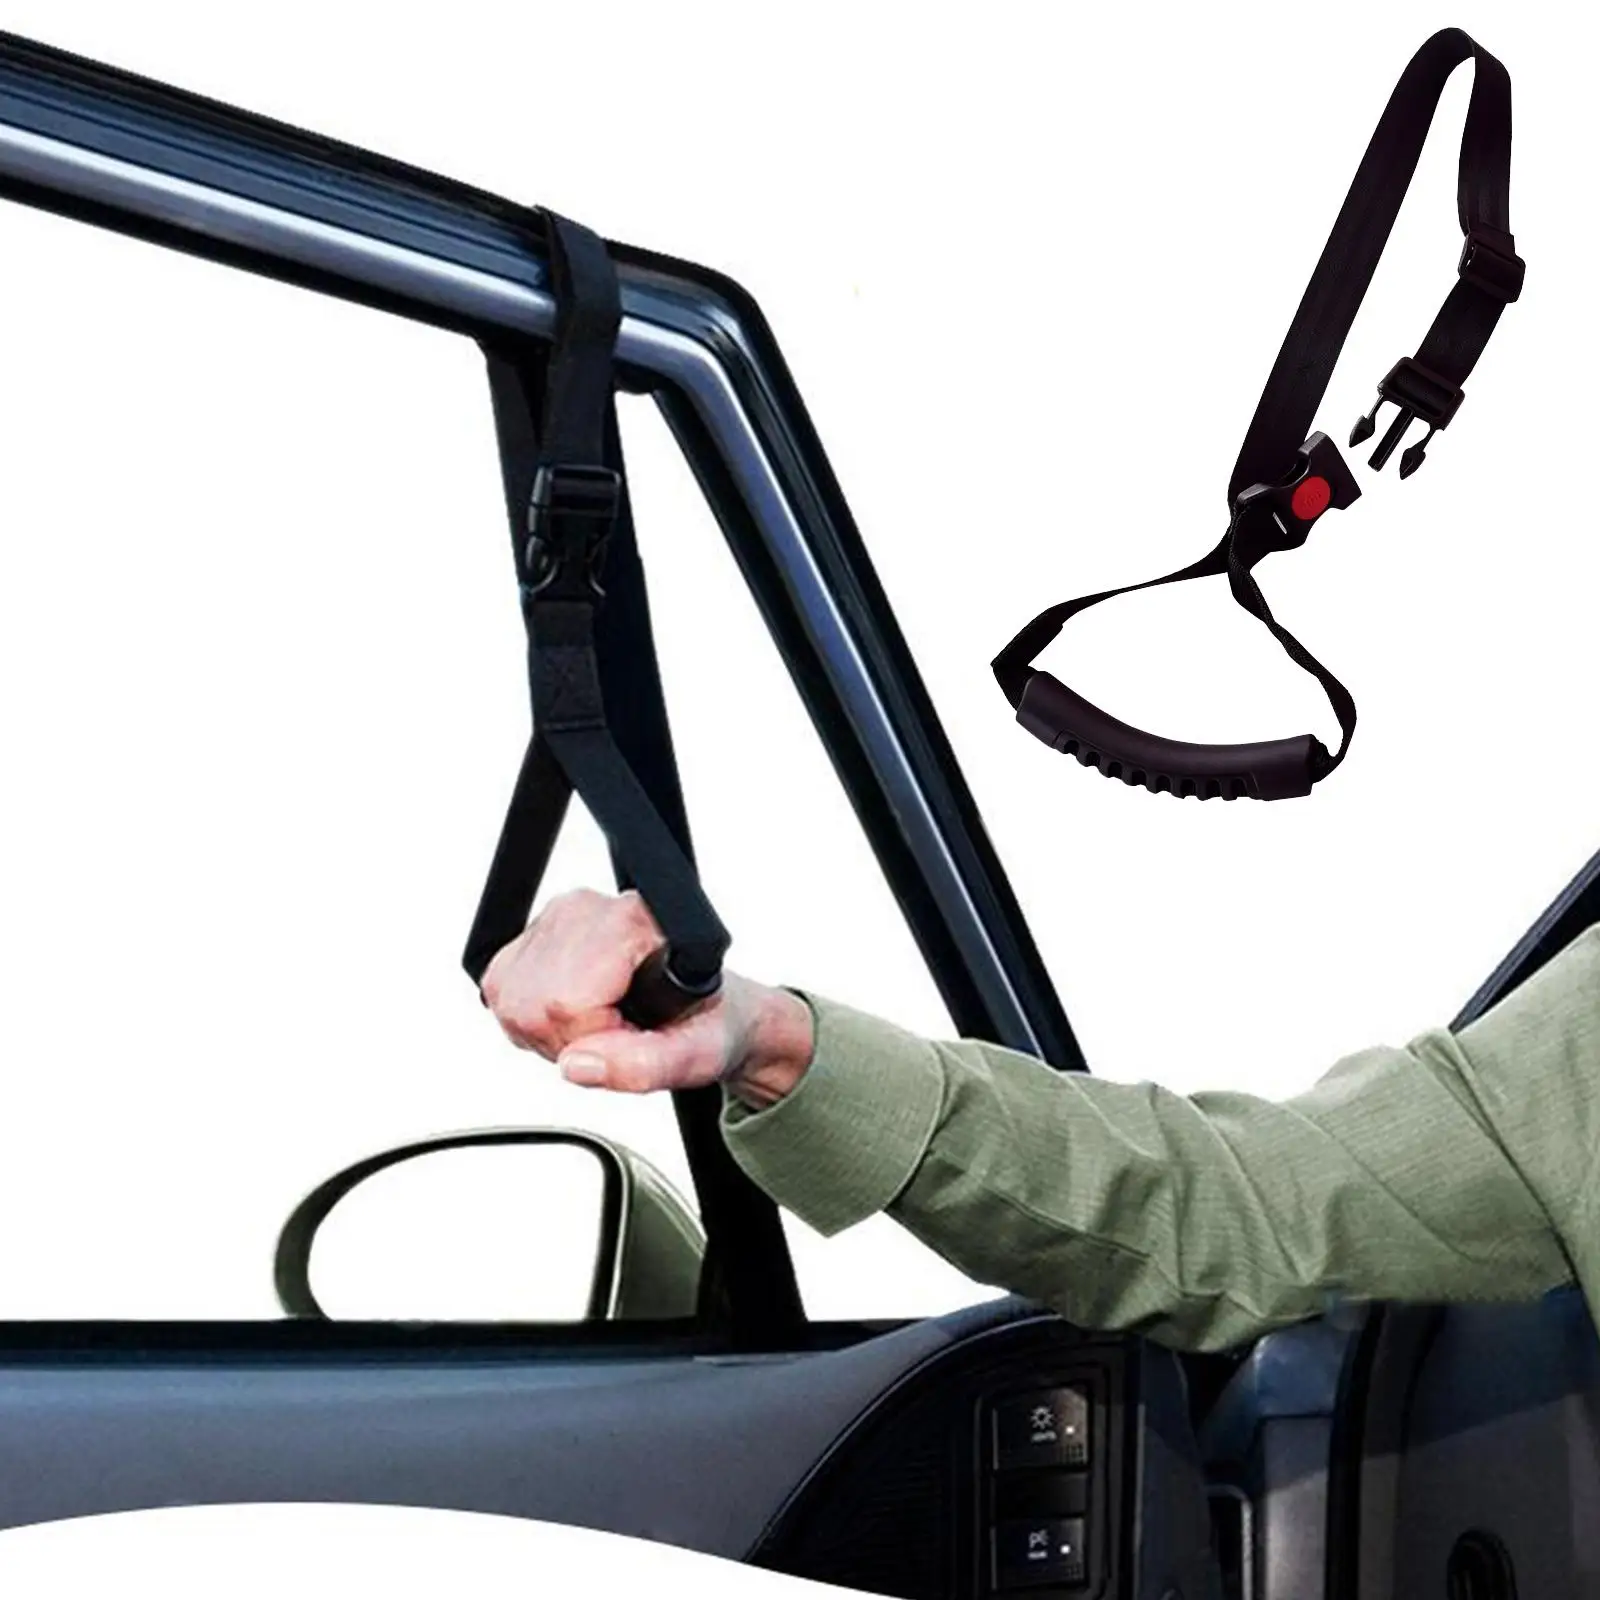  Handle Adjustable Standing Aid Vehicle Support Disability Help